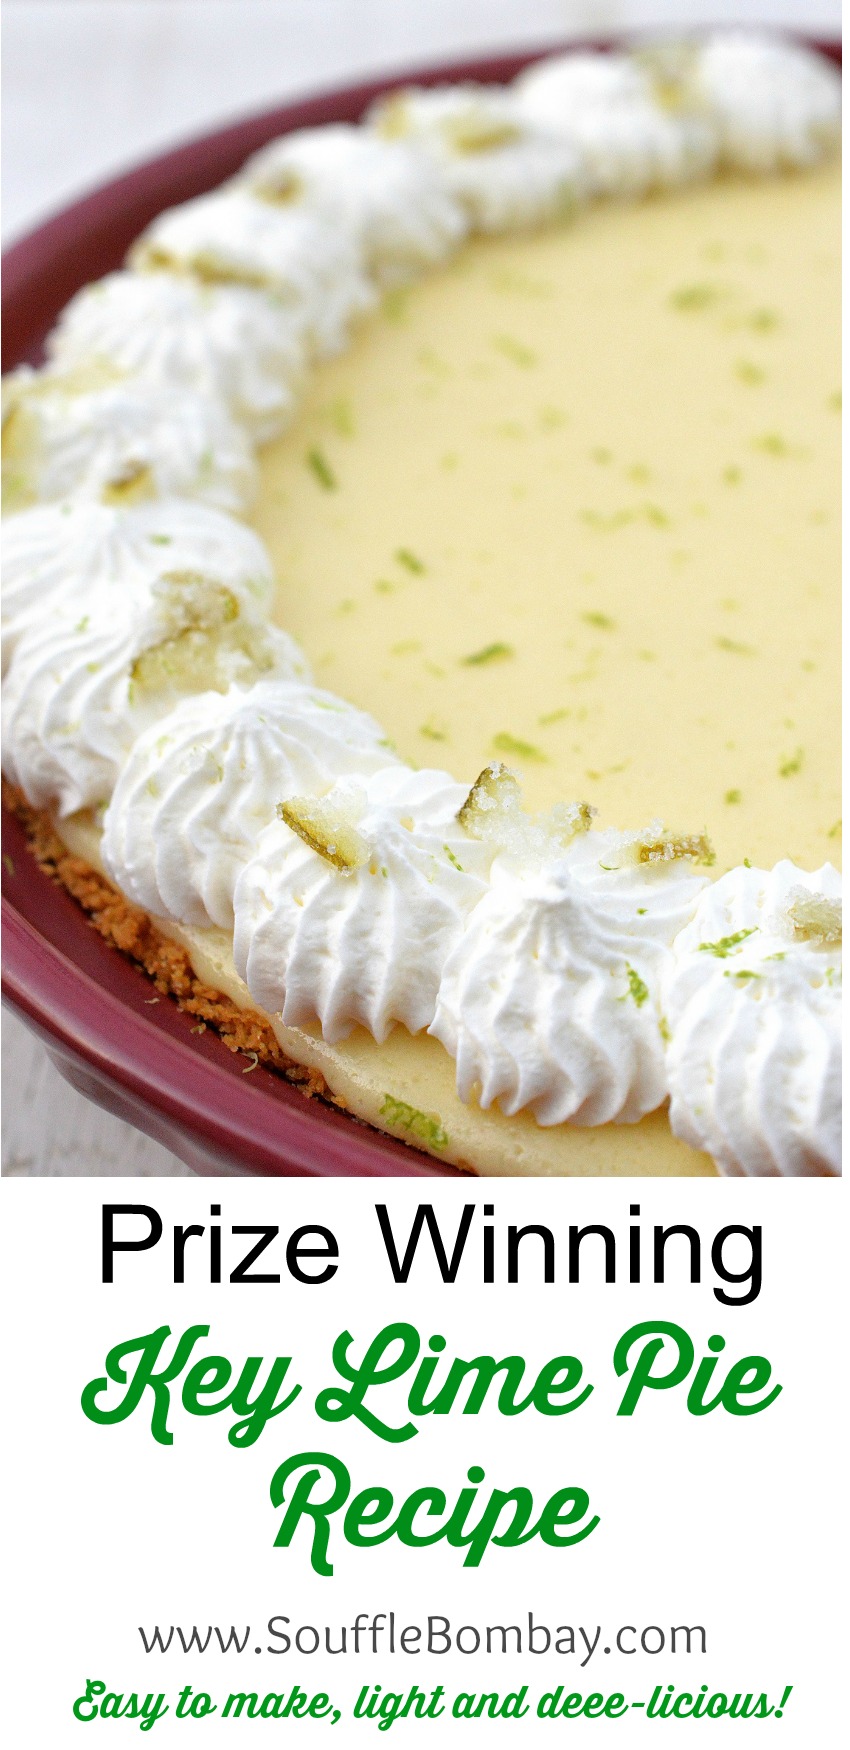 Prize Winning Key Lime Pie Recipe - It's easy and delicious!!